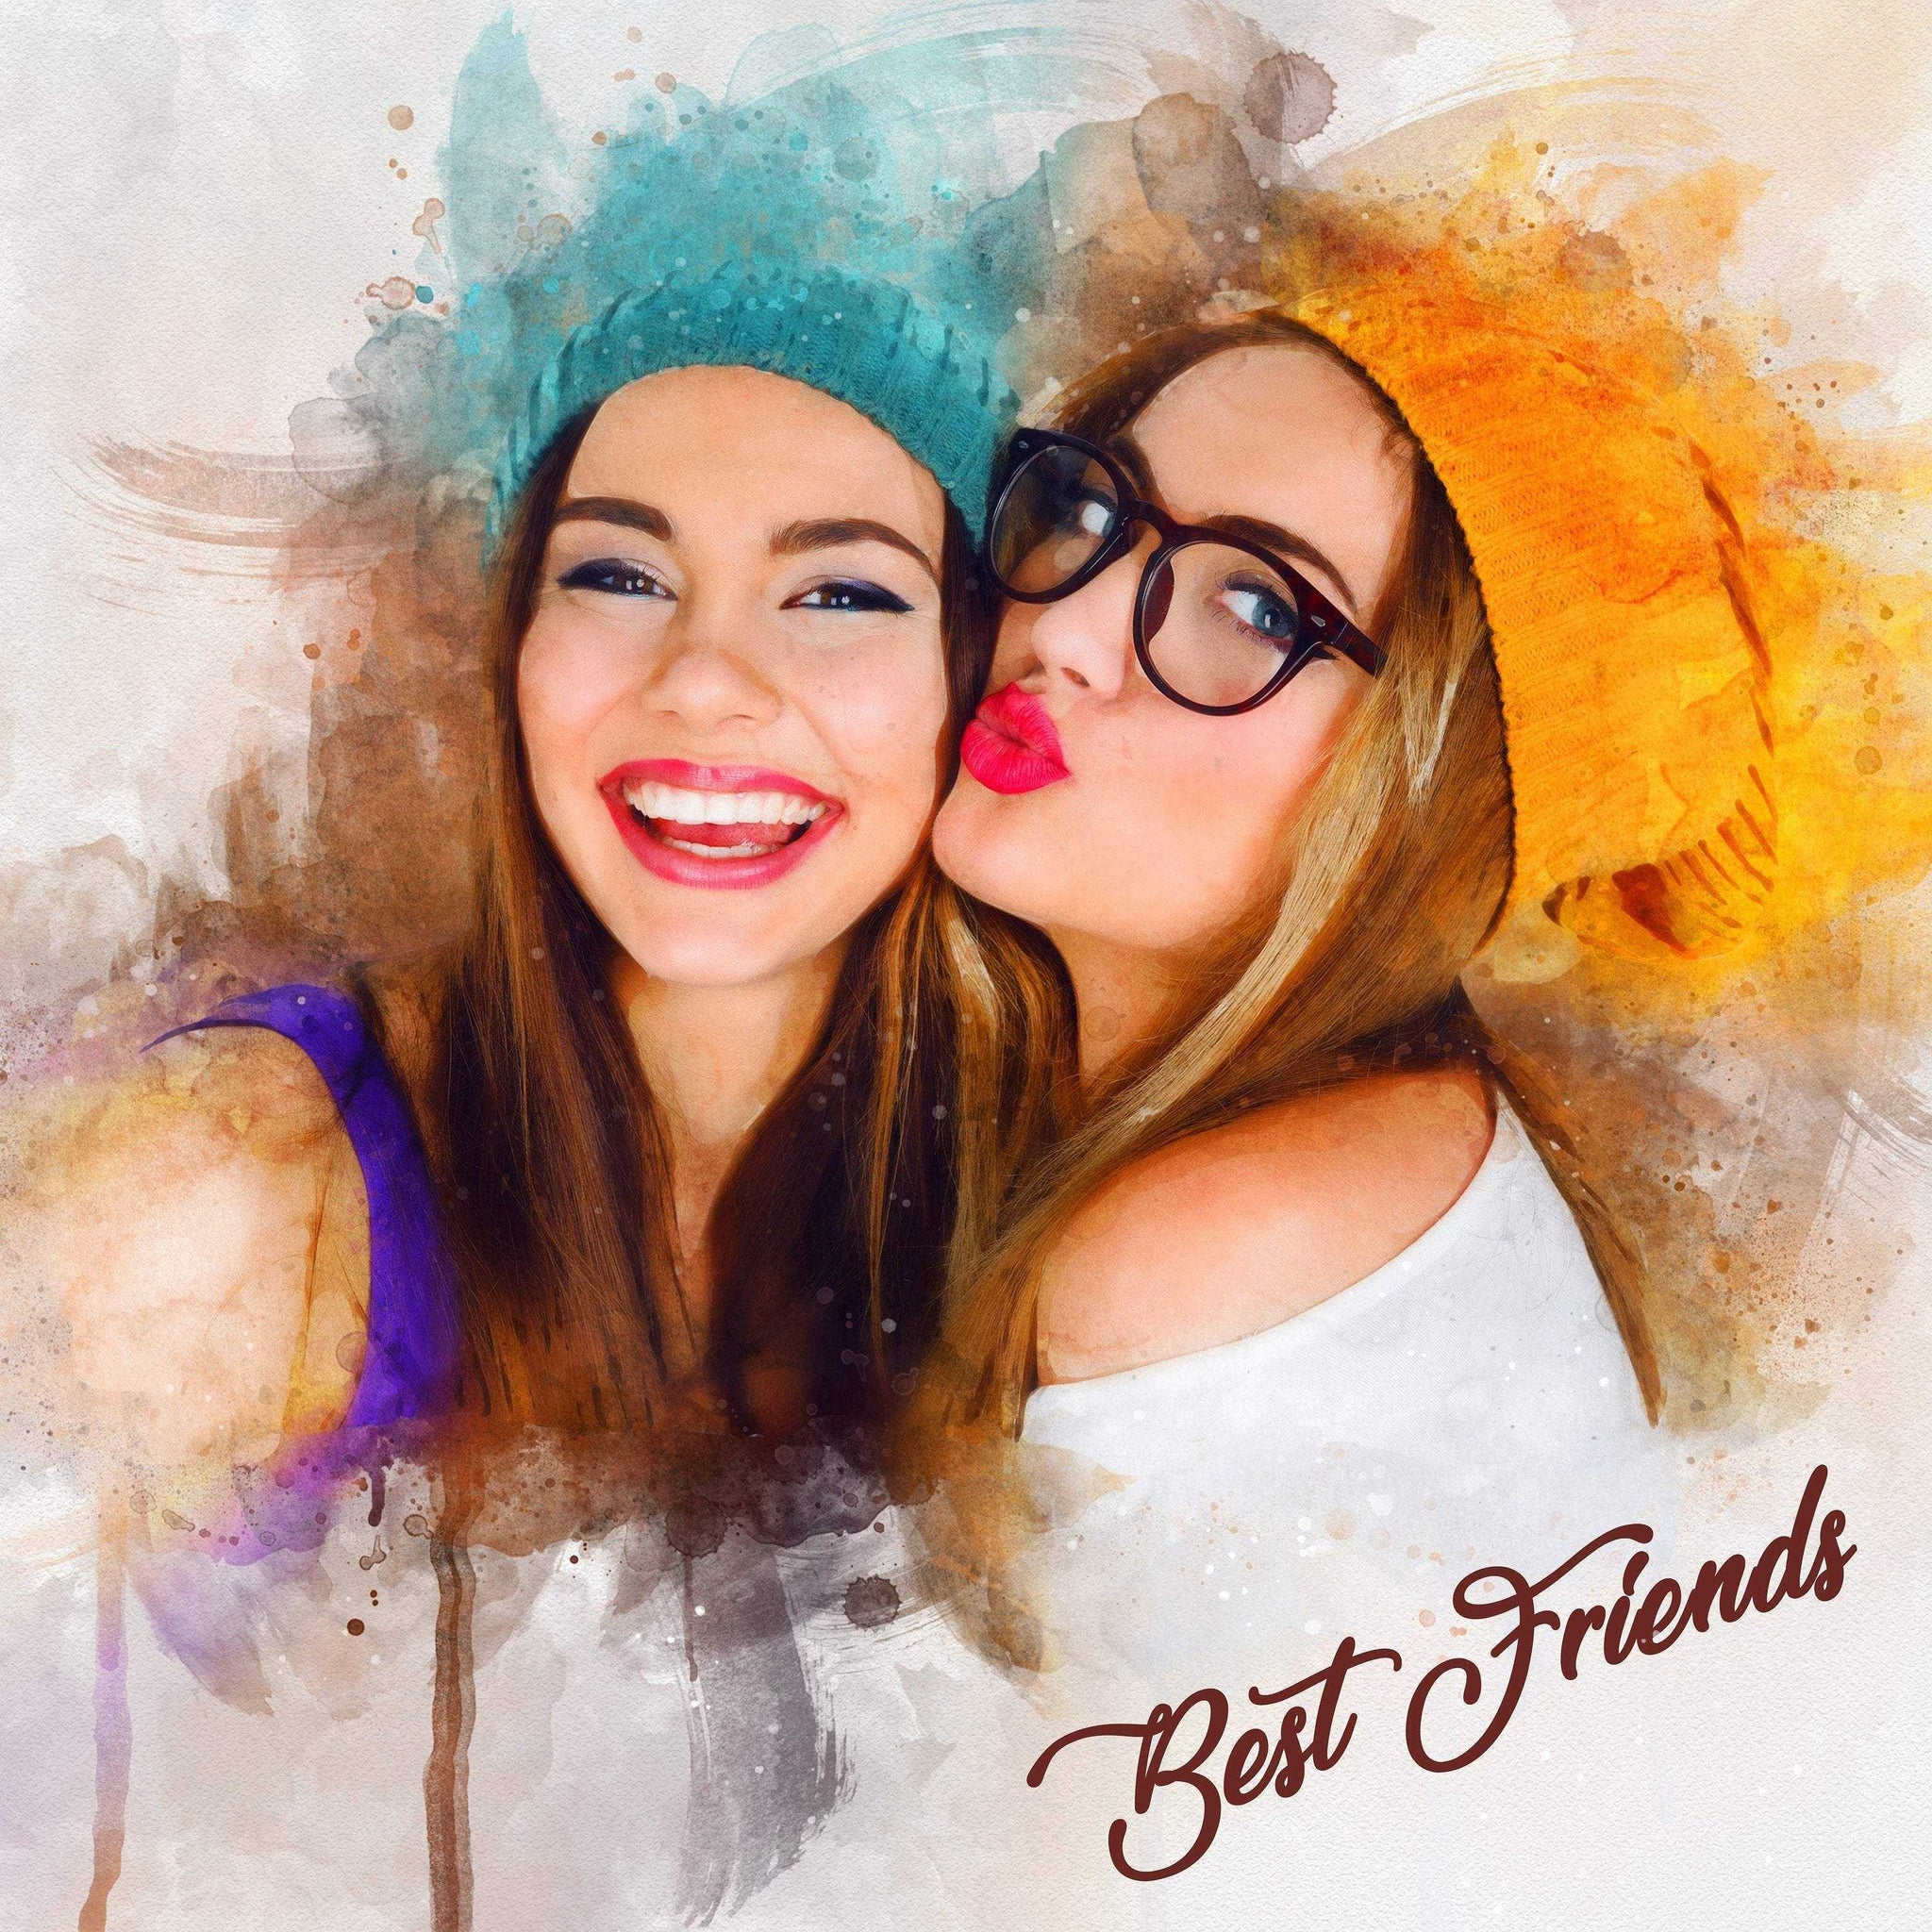 Personalized Best Friend Gifts for Women Unique Sentimental Box,16 Reasons  Why You Are My Best Friend Cute Birthday Gifts For Her Women, Friendship  Gifts For Women Friends